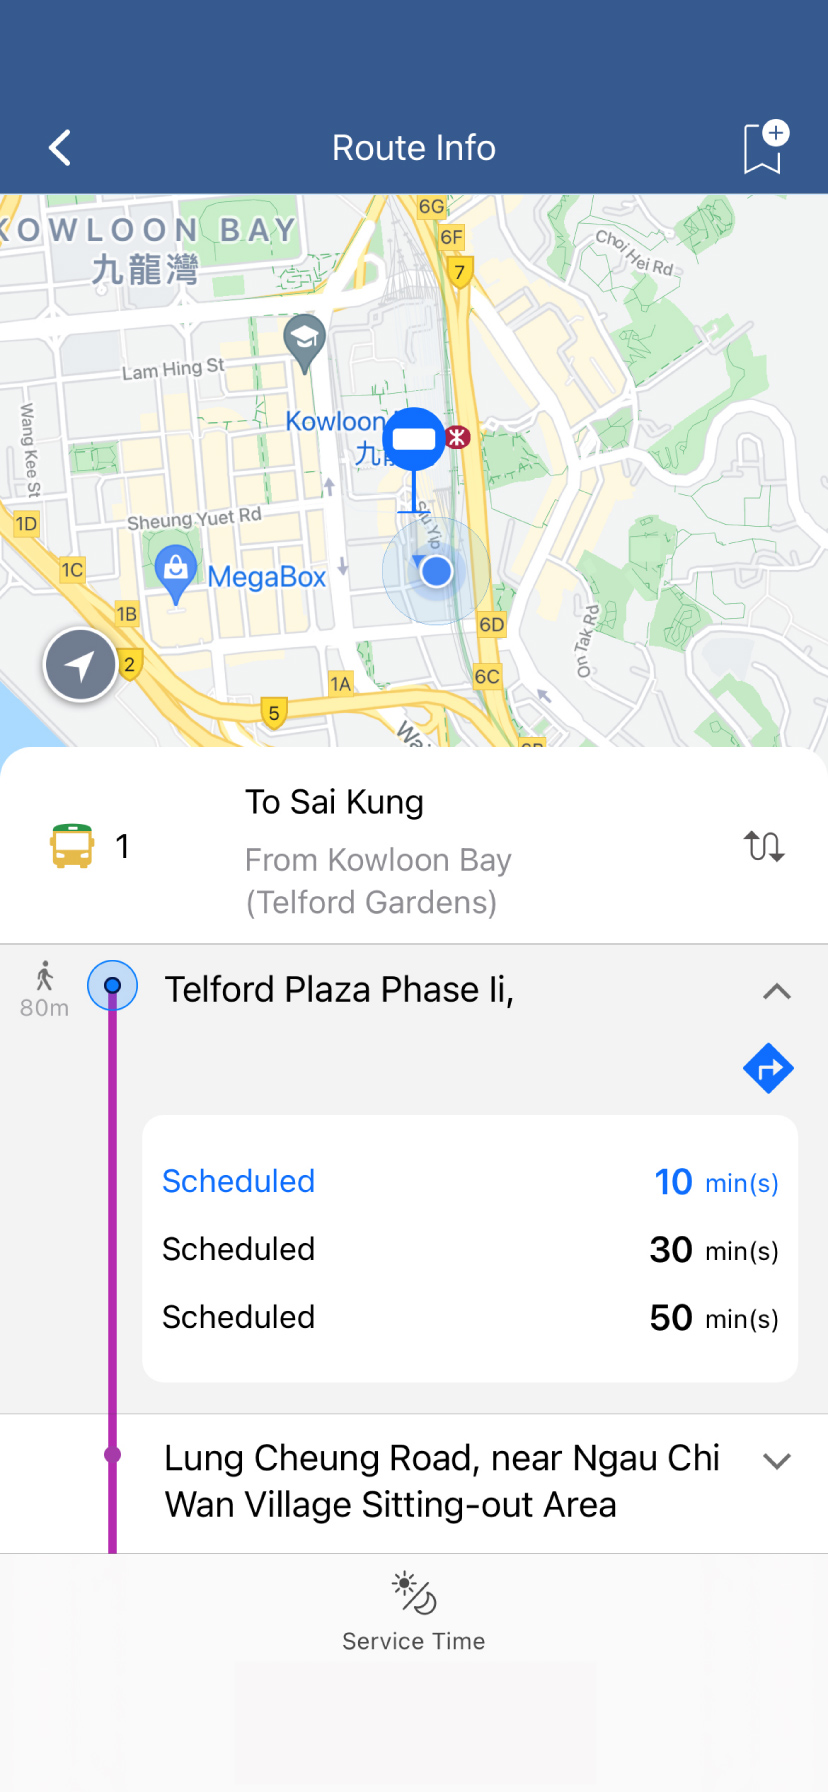 After selecting the route, the function will show the closest stop and the estimated arrival time of three upcoming arrivals within next 60 minutes.